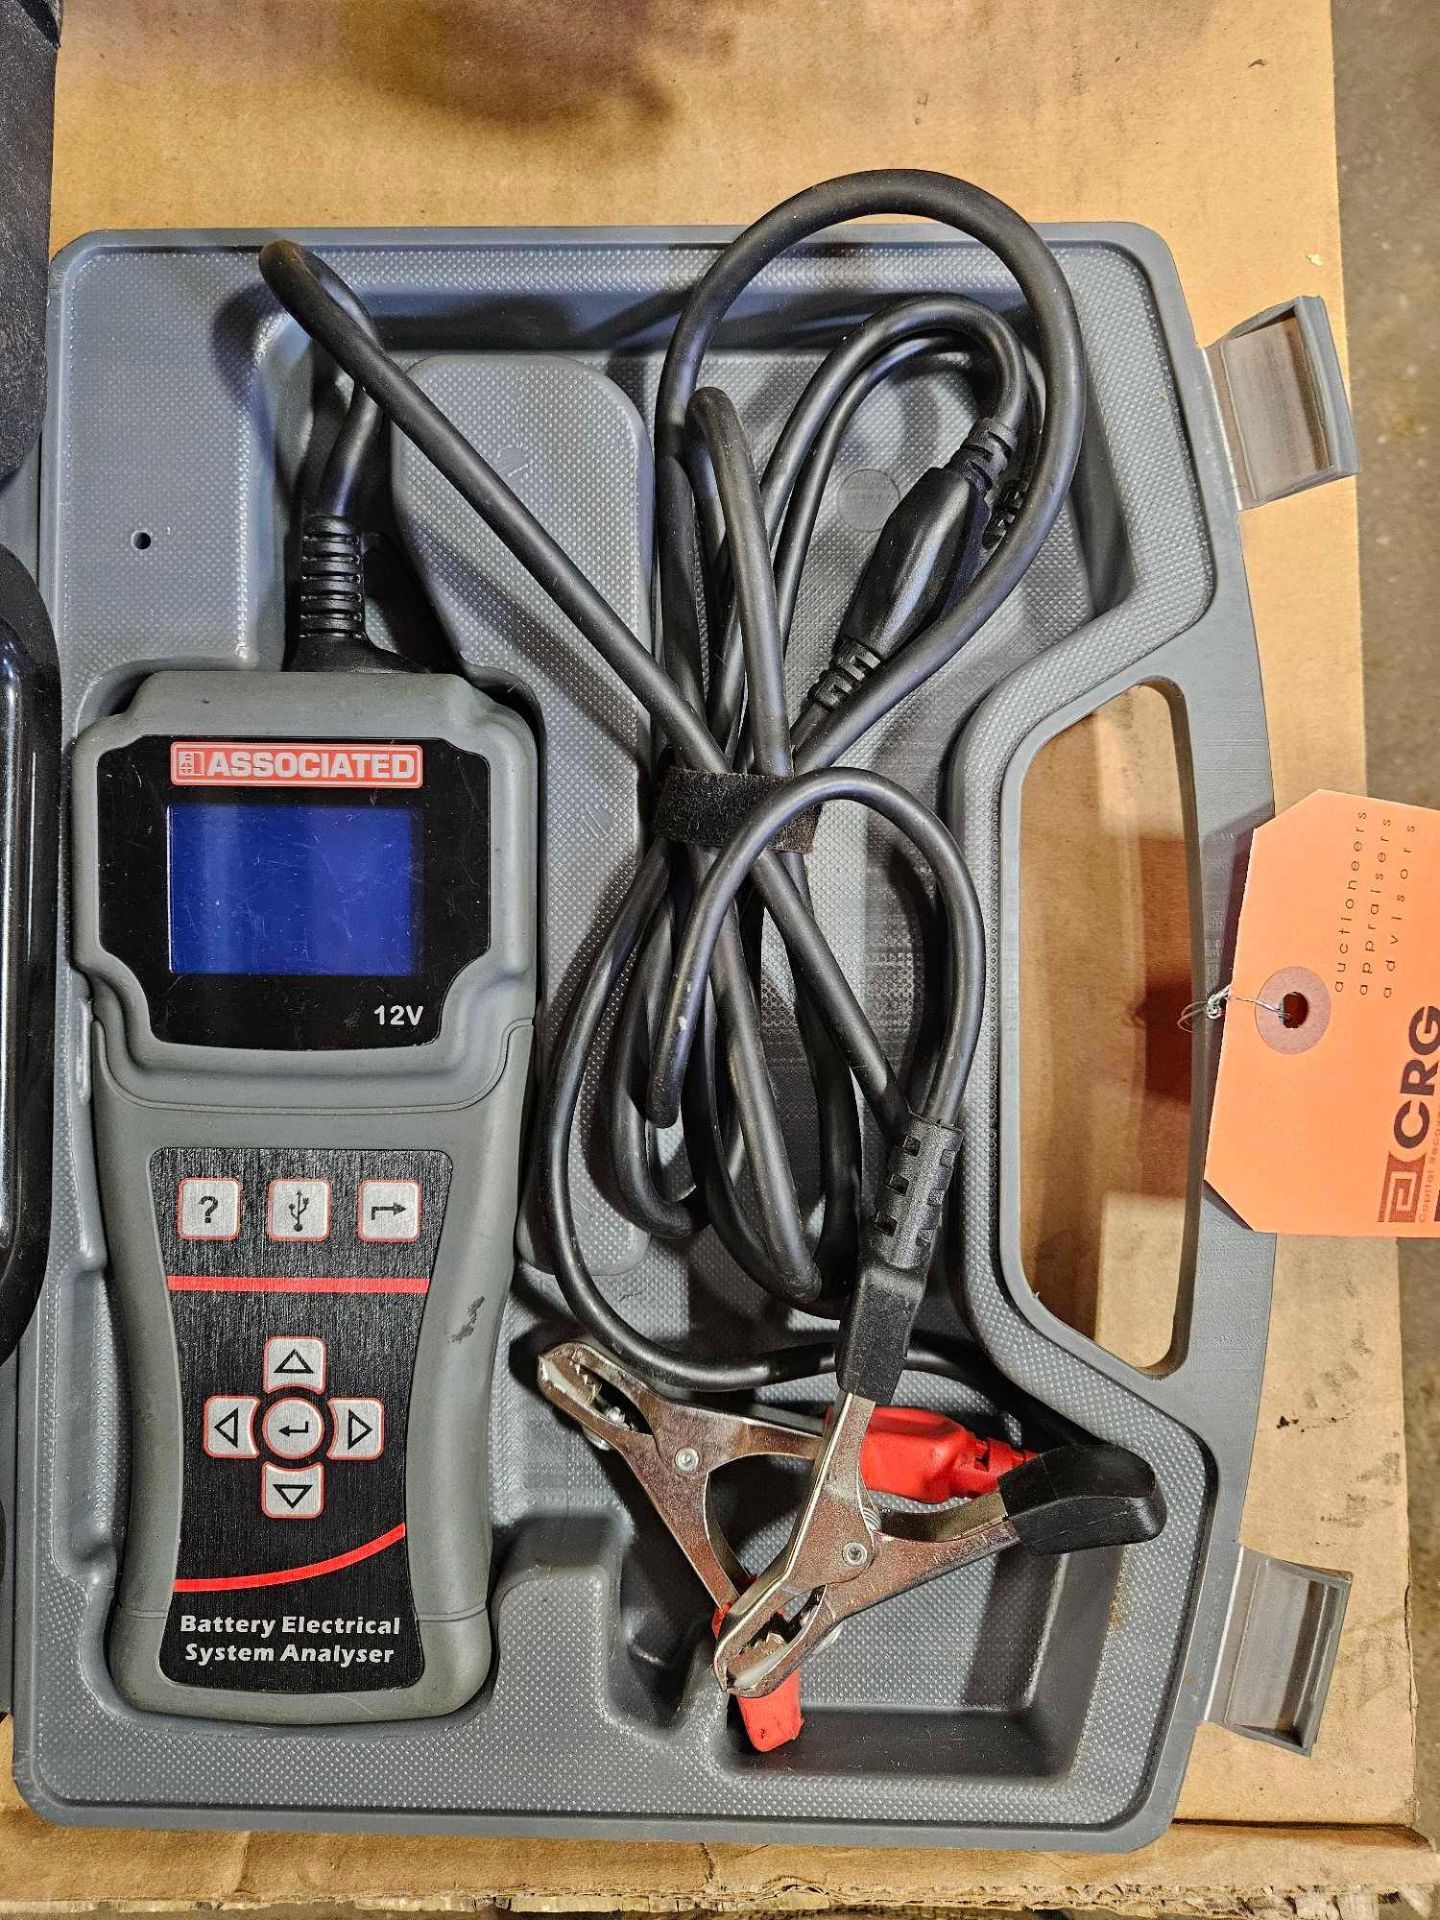 Battery Electrical System Analyzer/ Electronic Leak Detector - Image 3 of 4